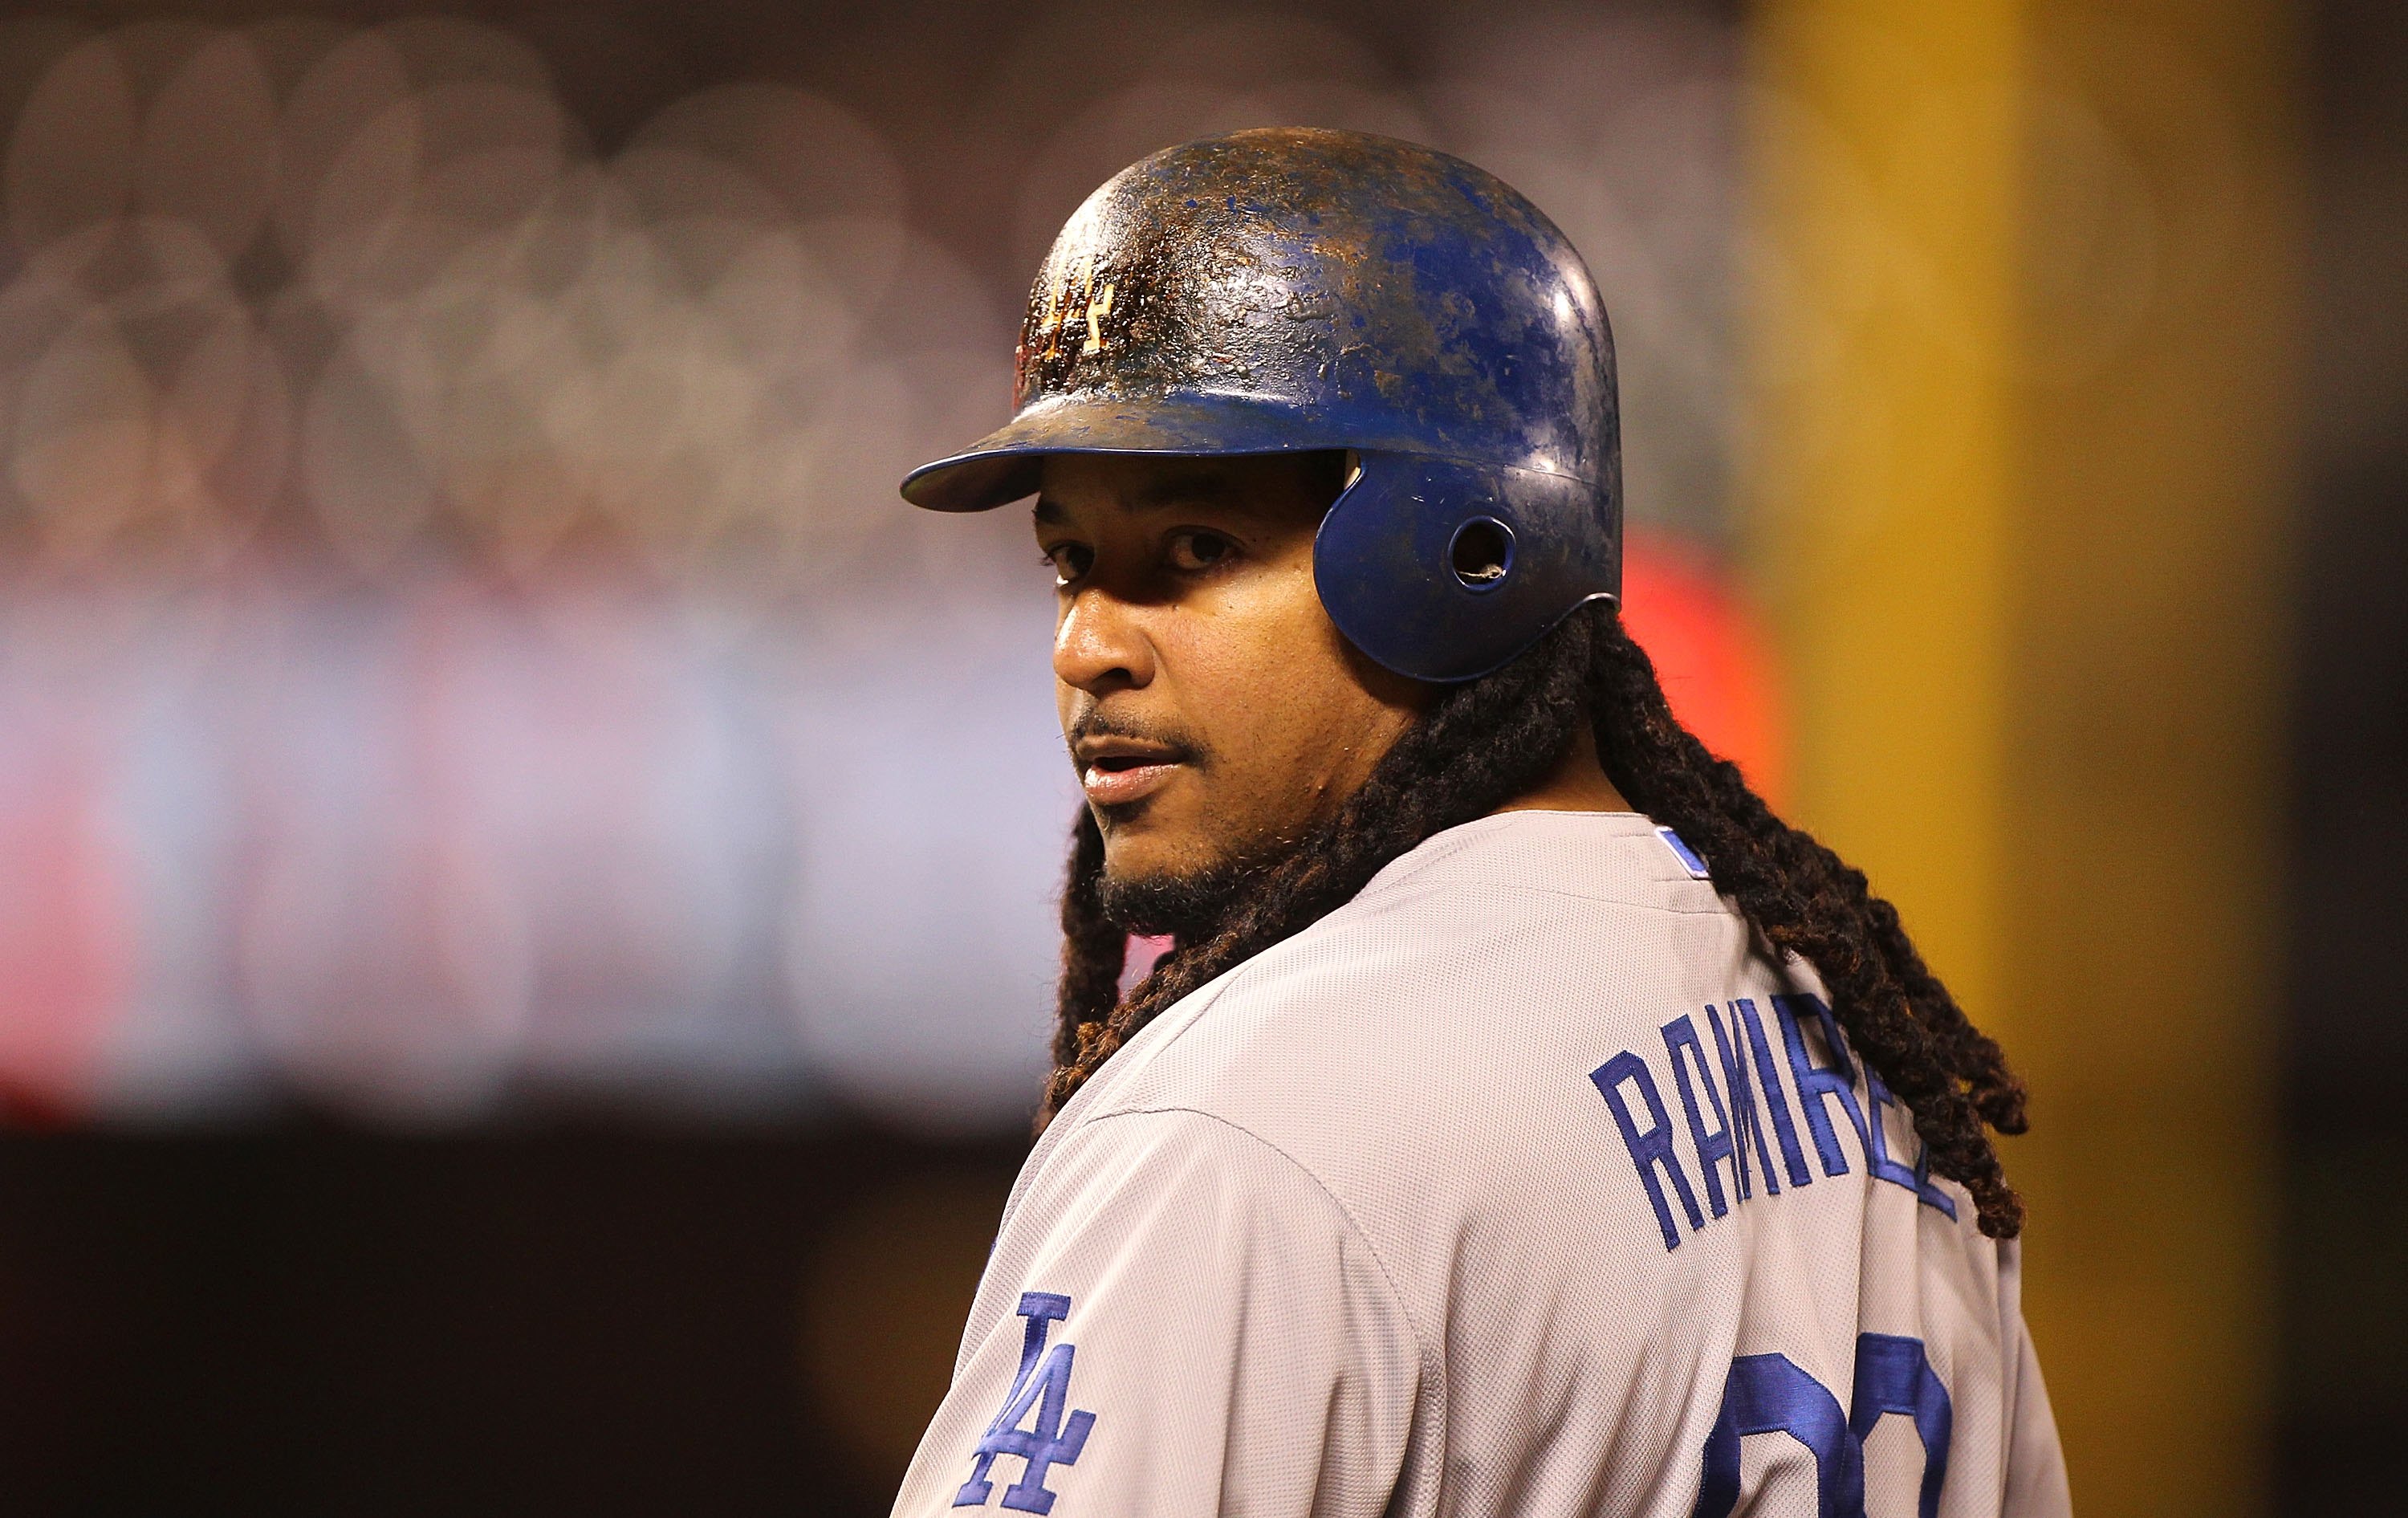 Manny Ramirez homers again as part of 2-for-5 night, stays hot against  lefties in triple-A